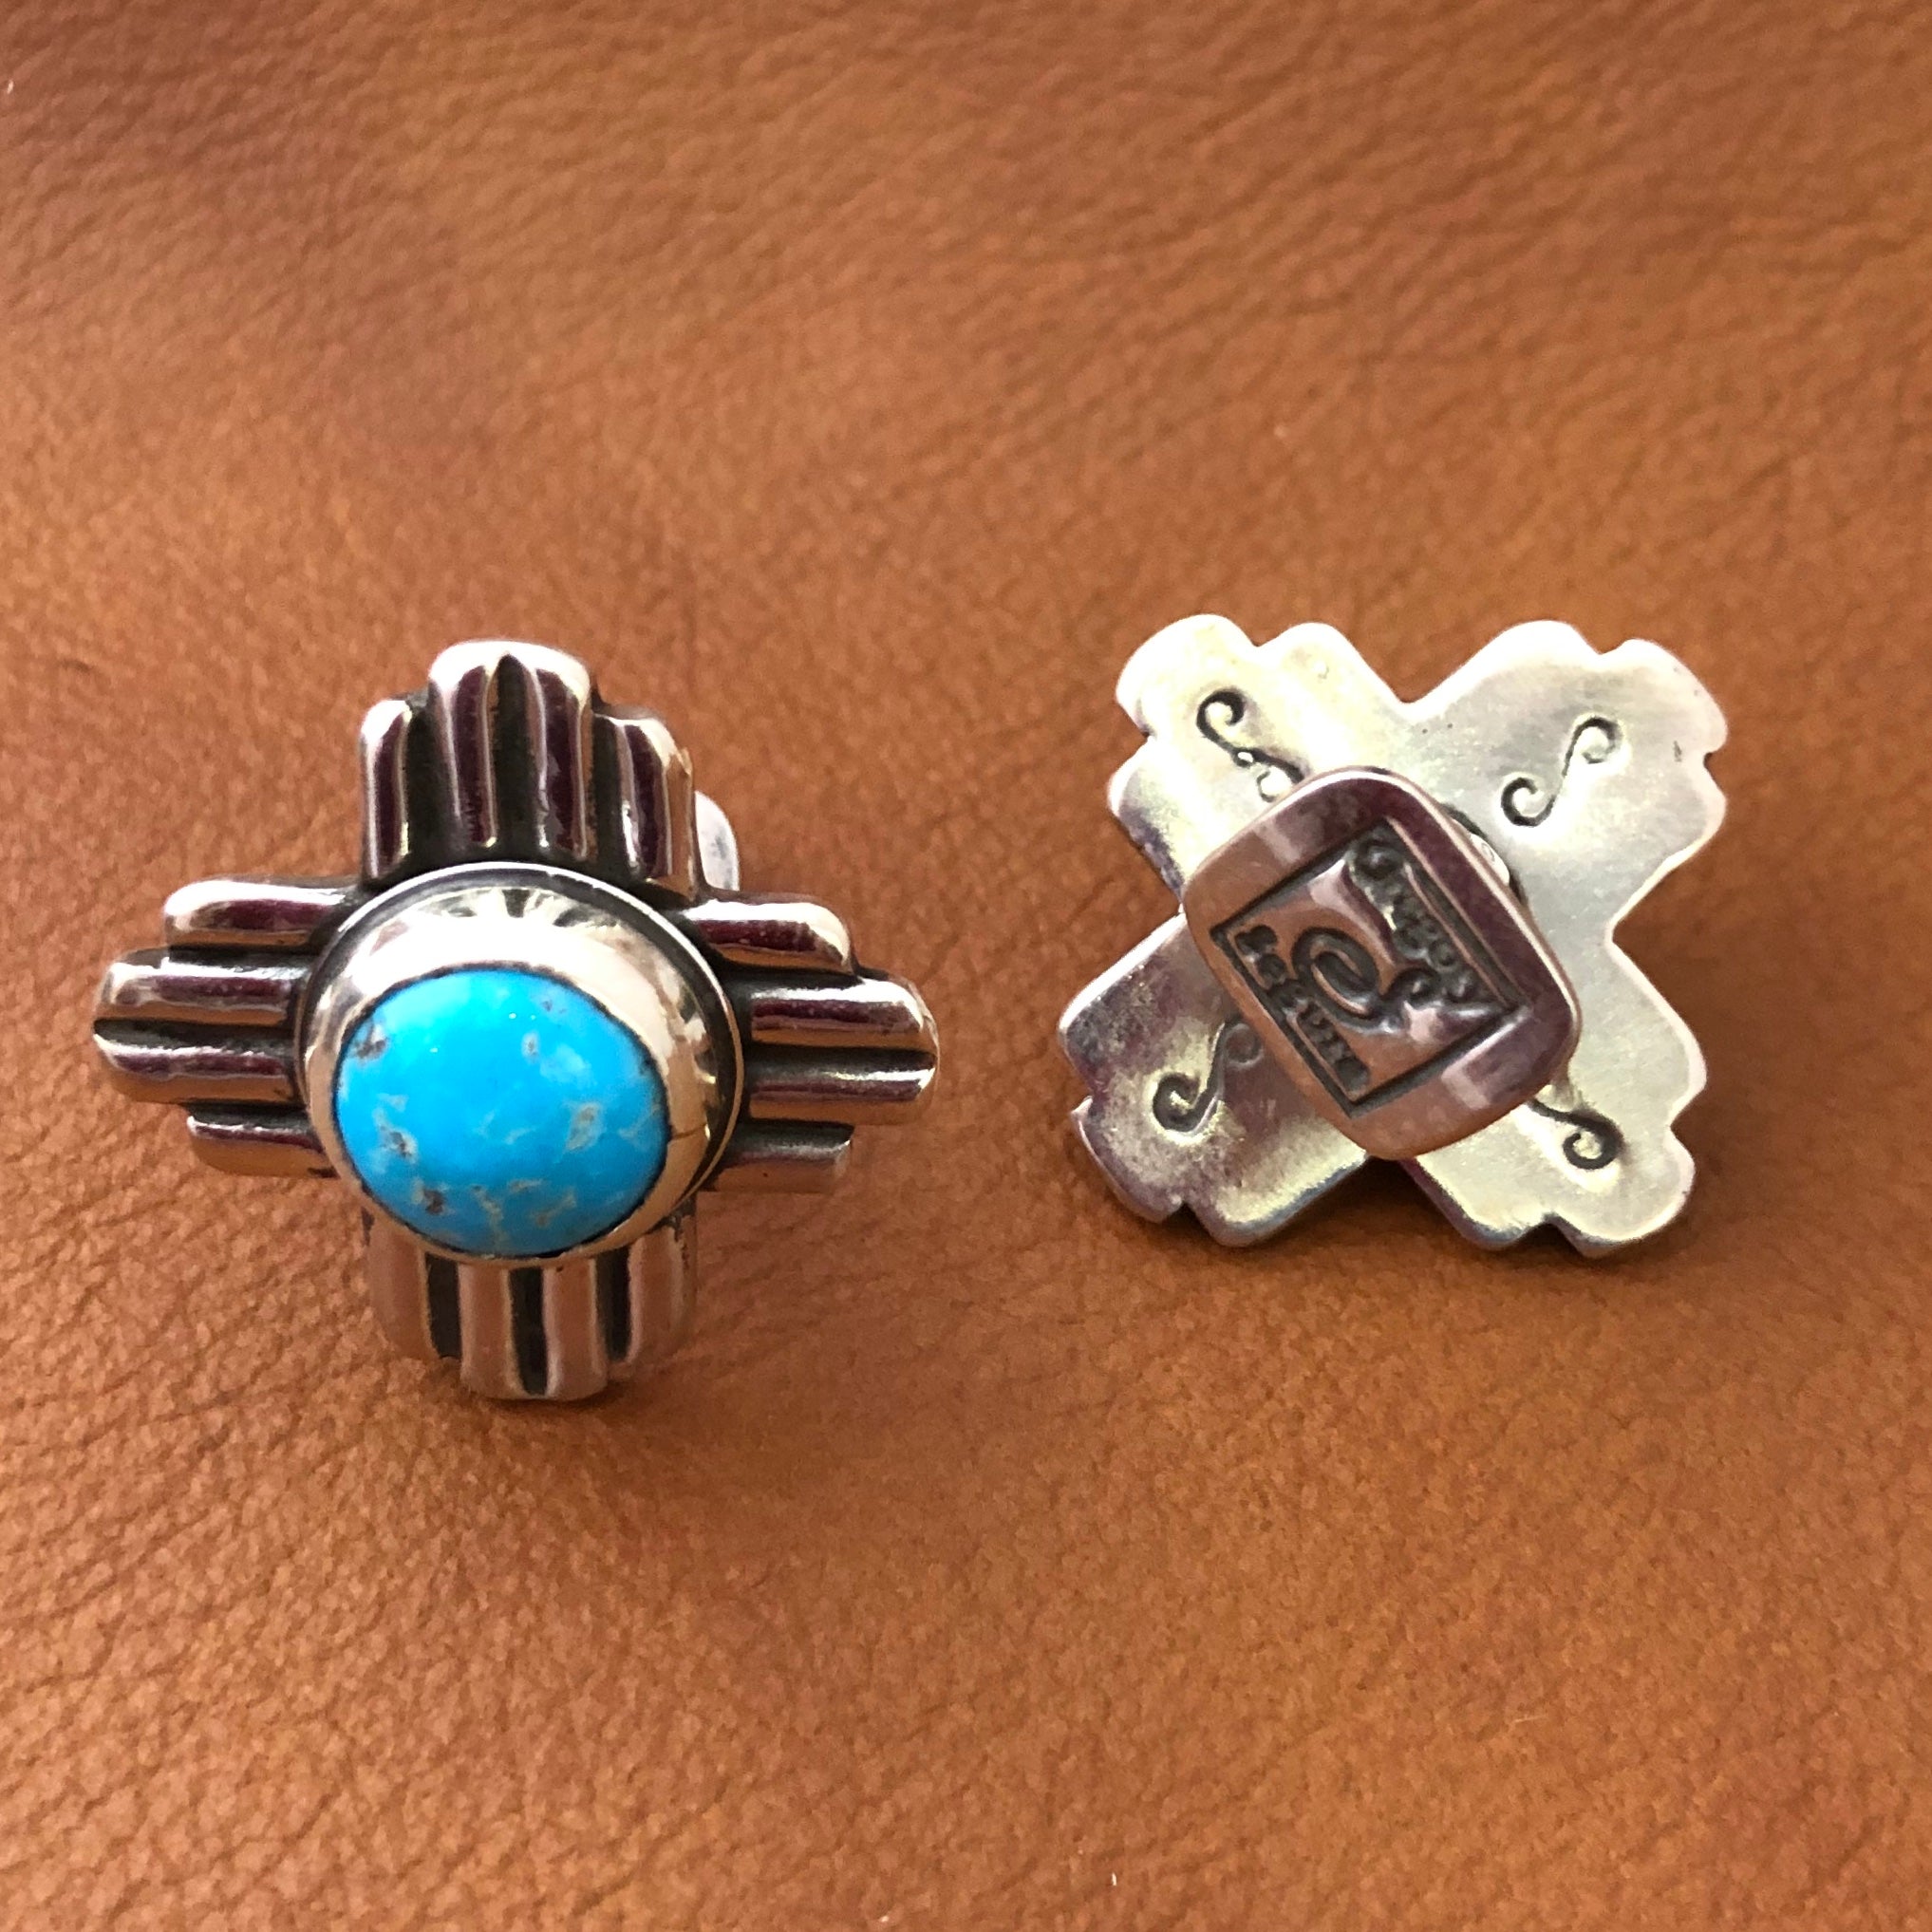 Zia Turquoise Cuff Links